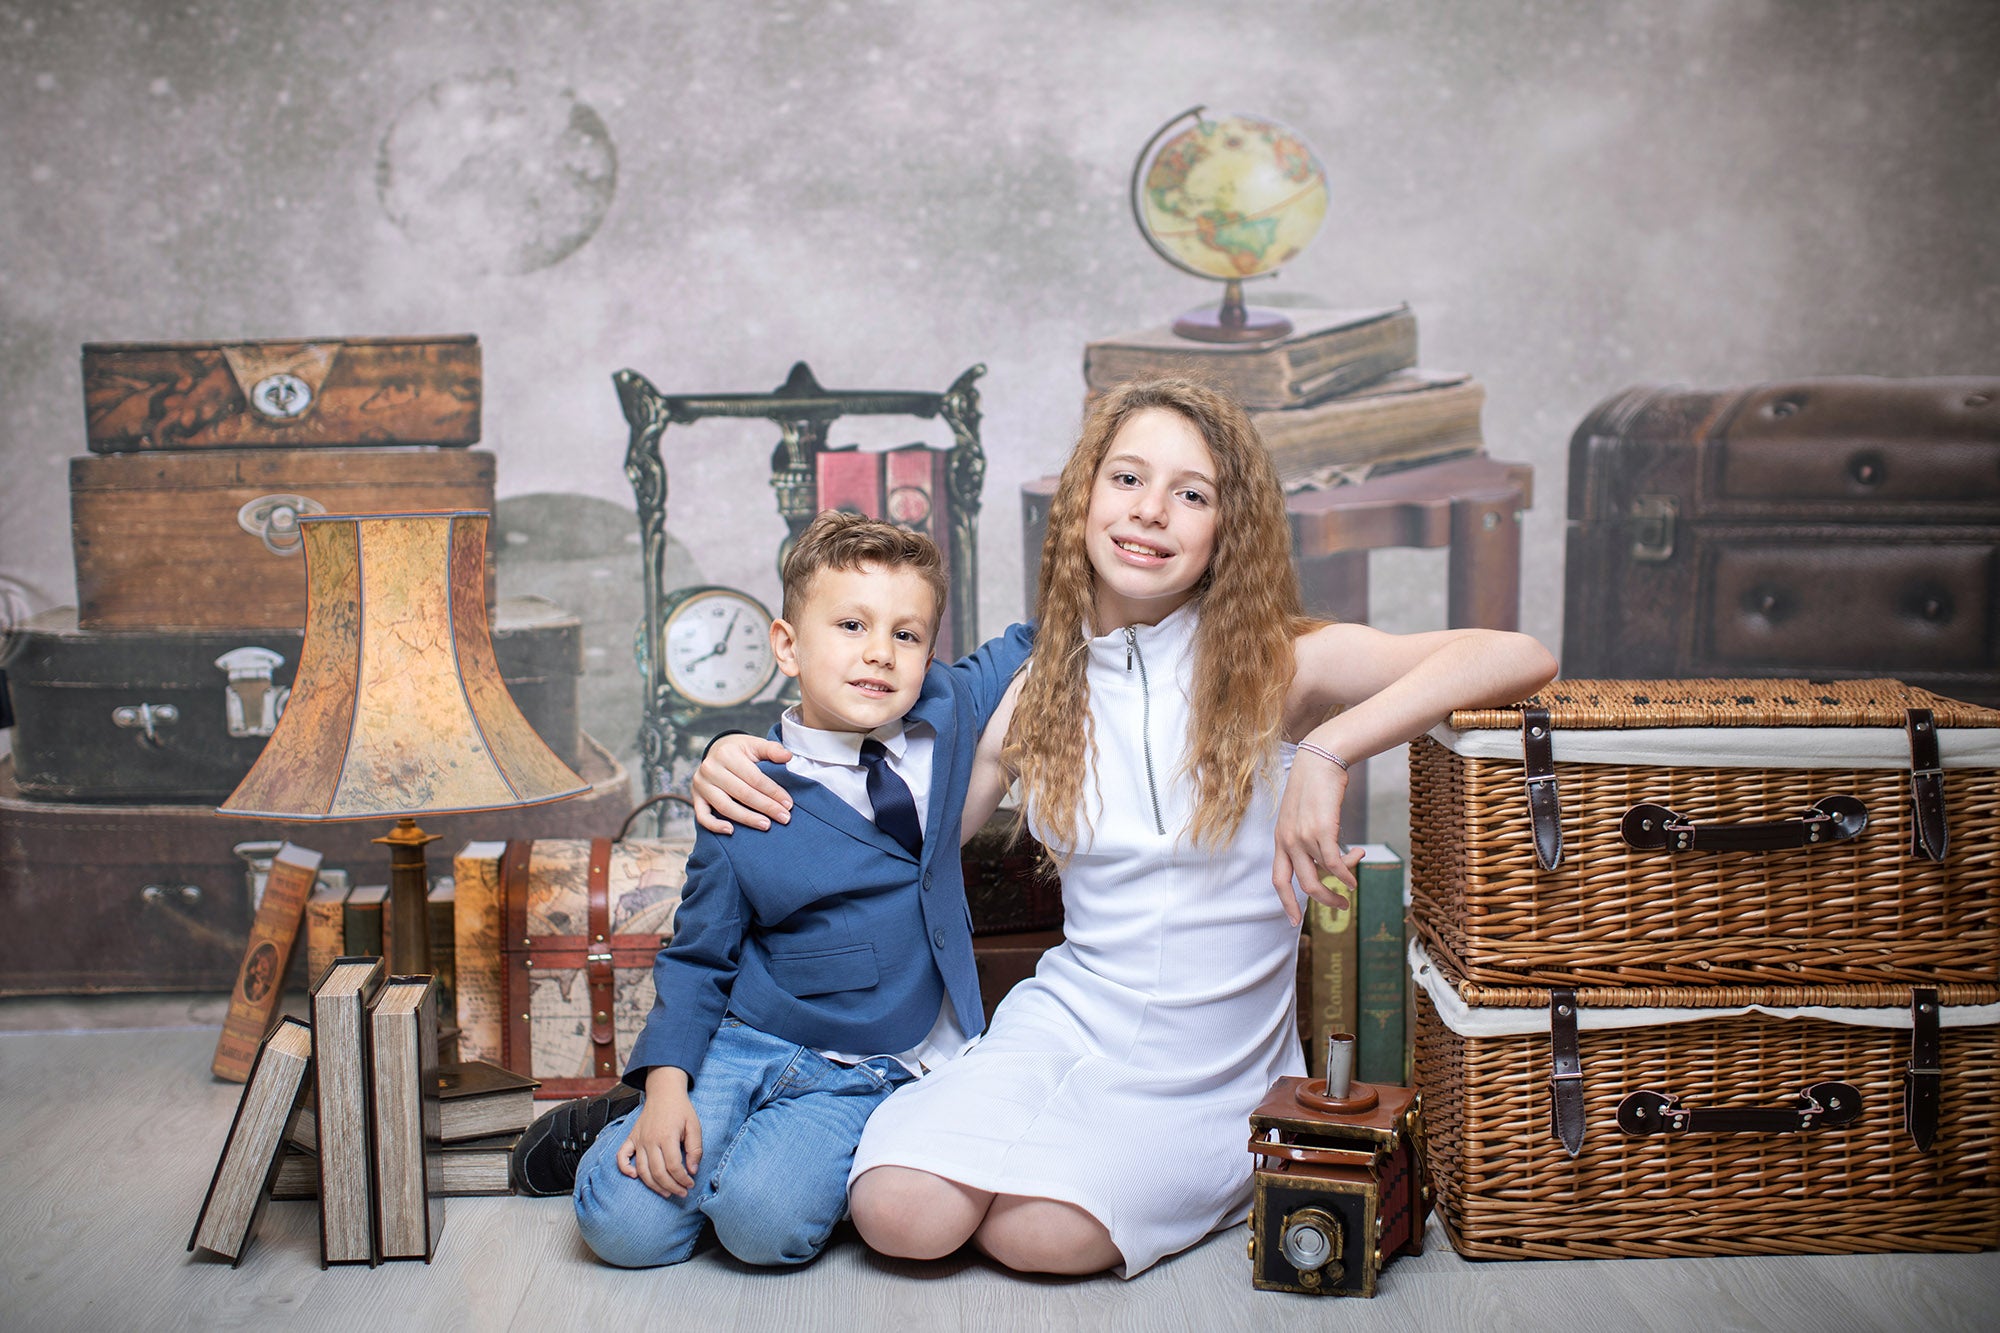 Kate Vintage Suitcase and Book Travel with me Backdrop for Children Designed By Ava Lee